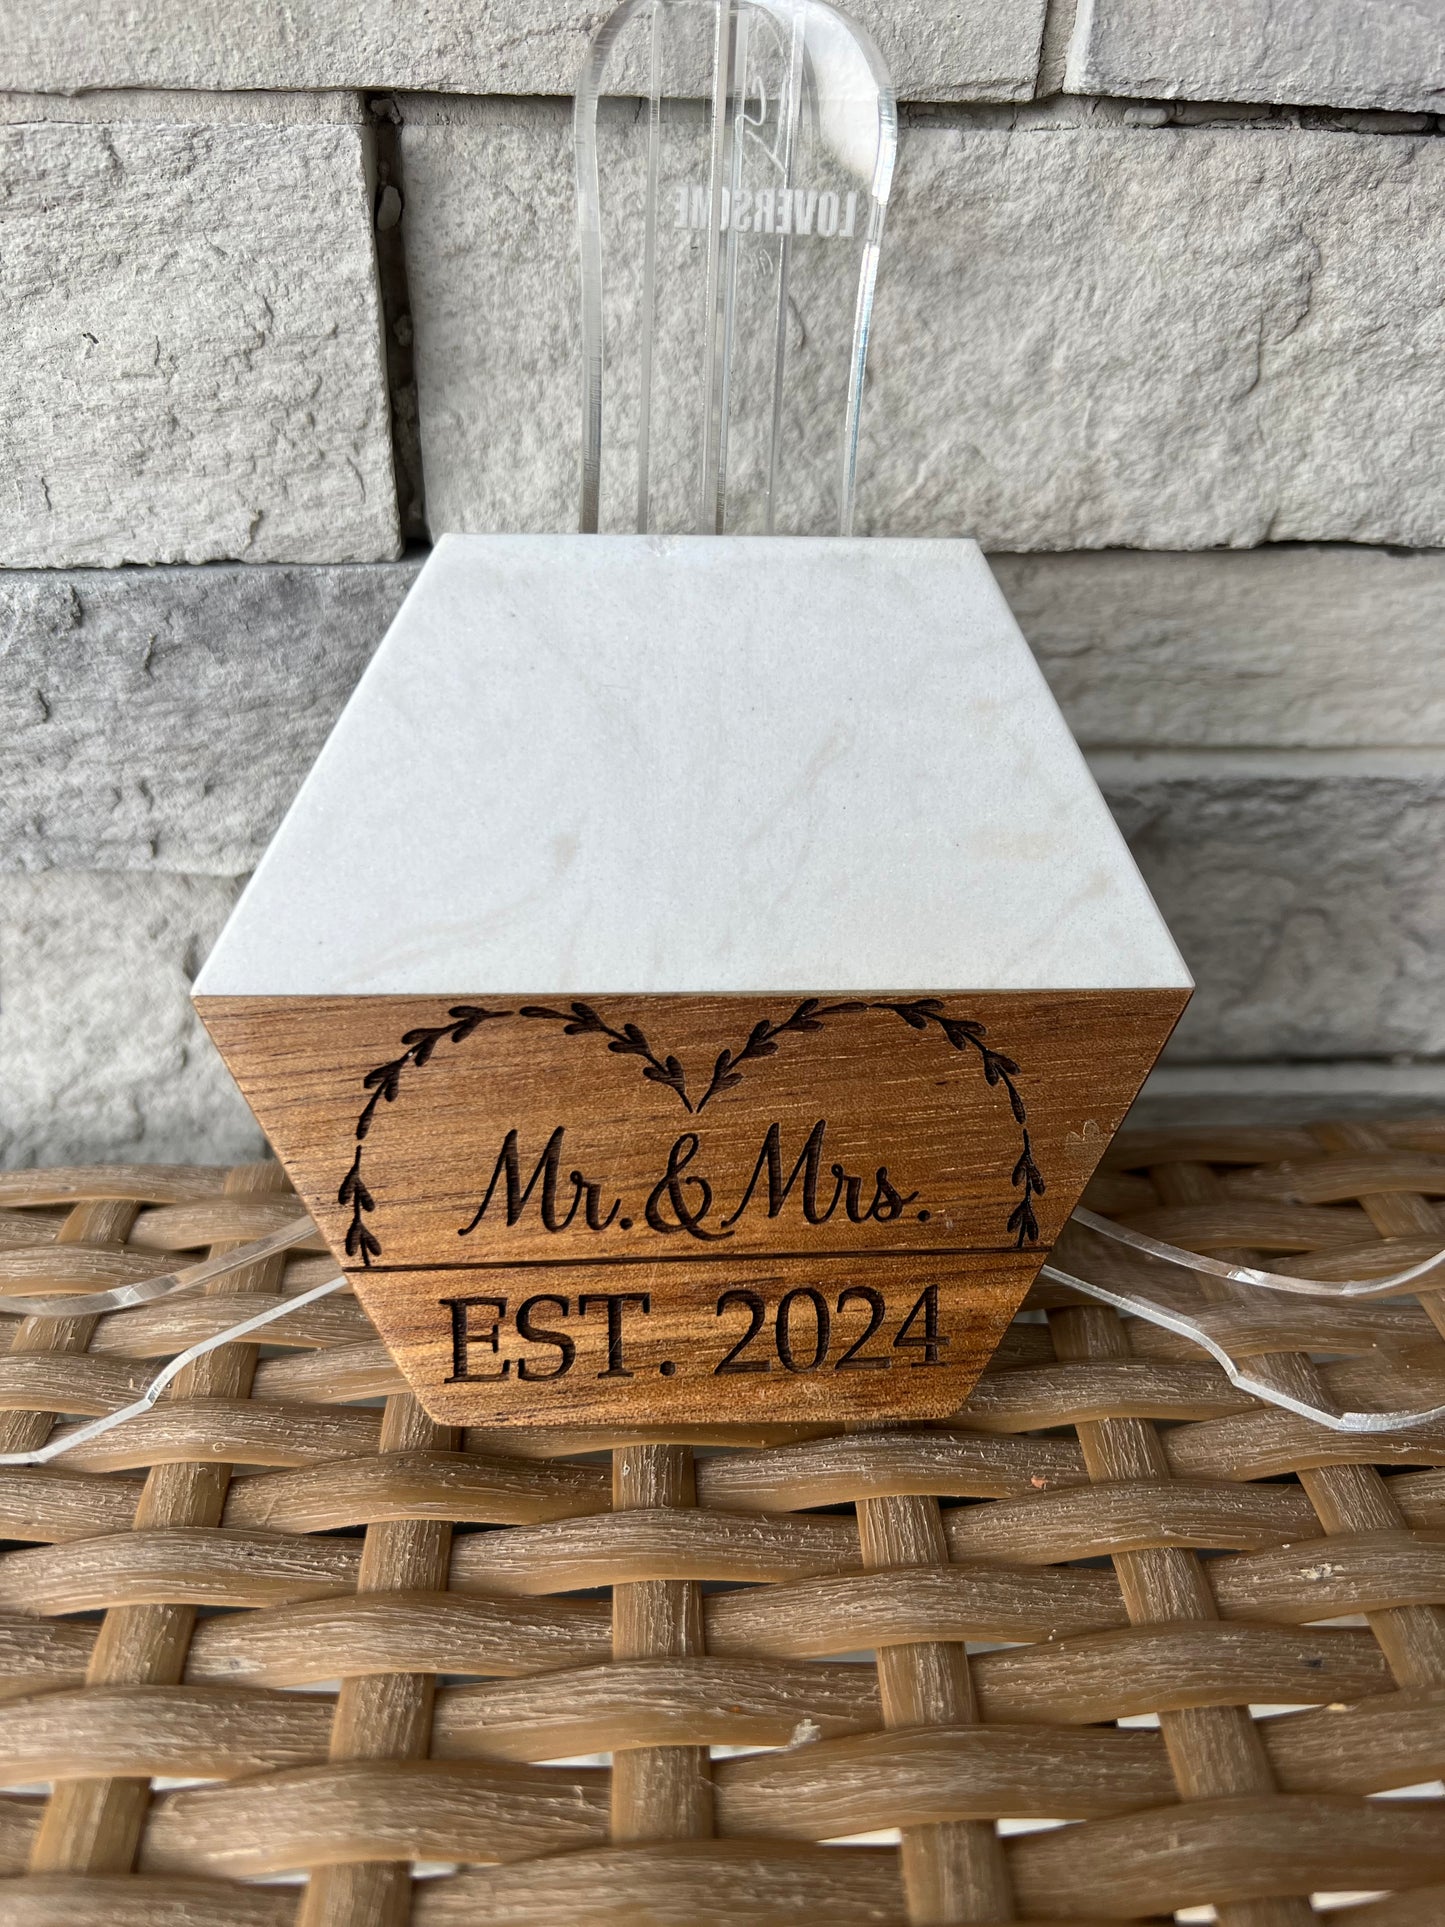 Mr. And Mrs. Est. 2024 Wood and Marble Coasters 2 Pack Round